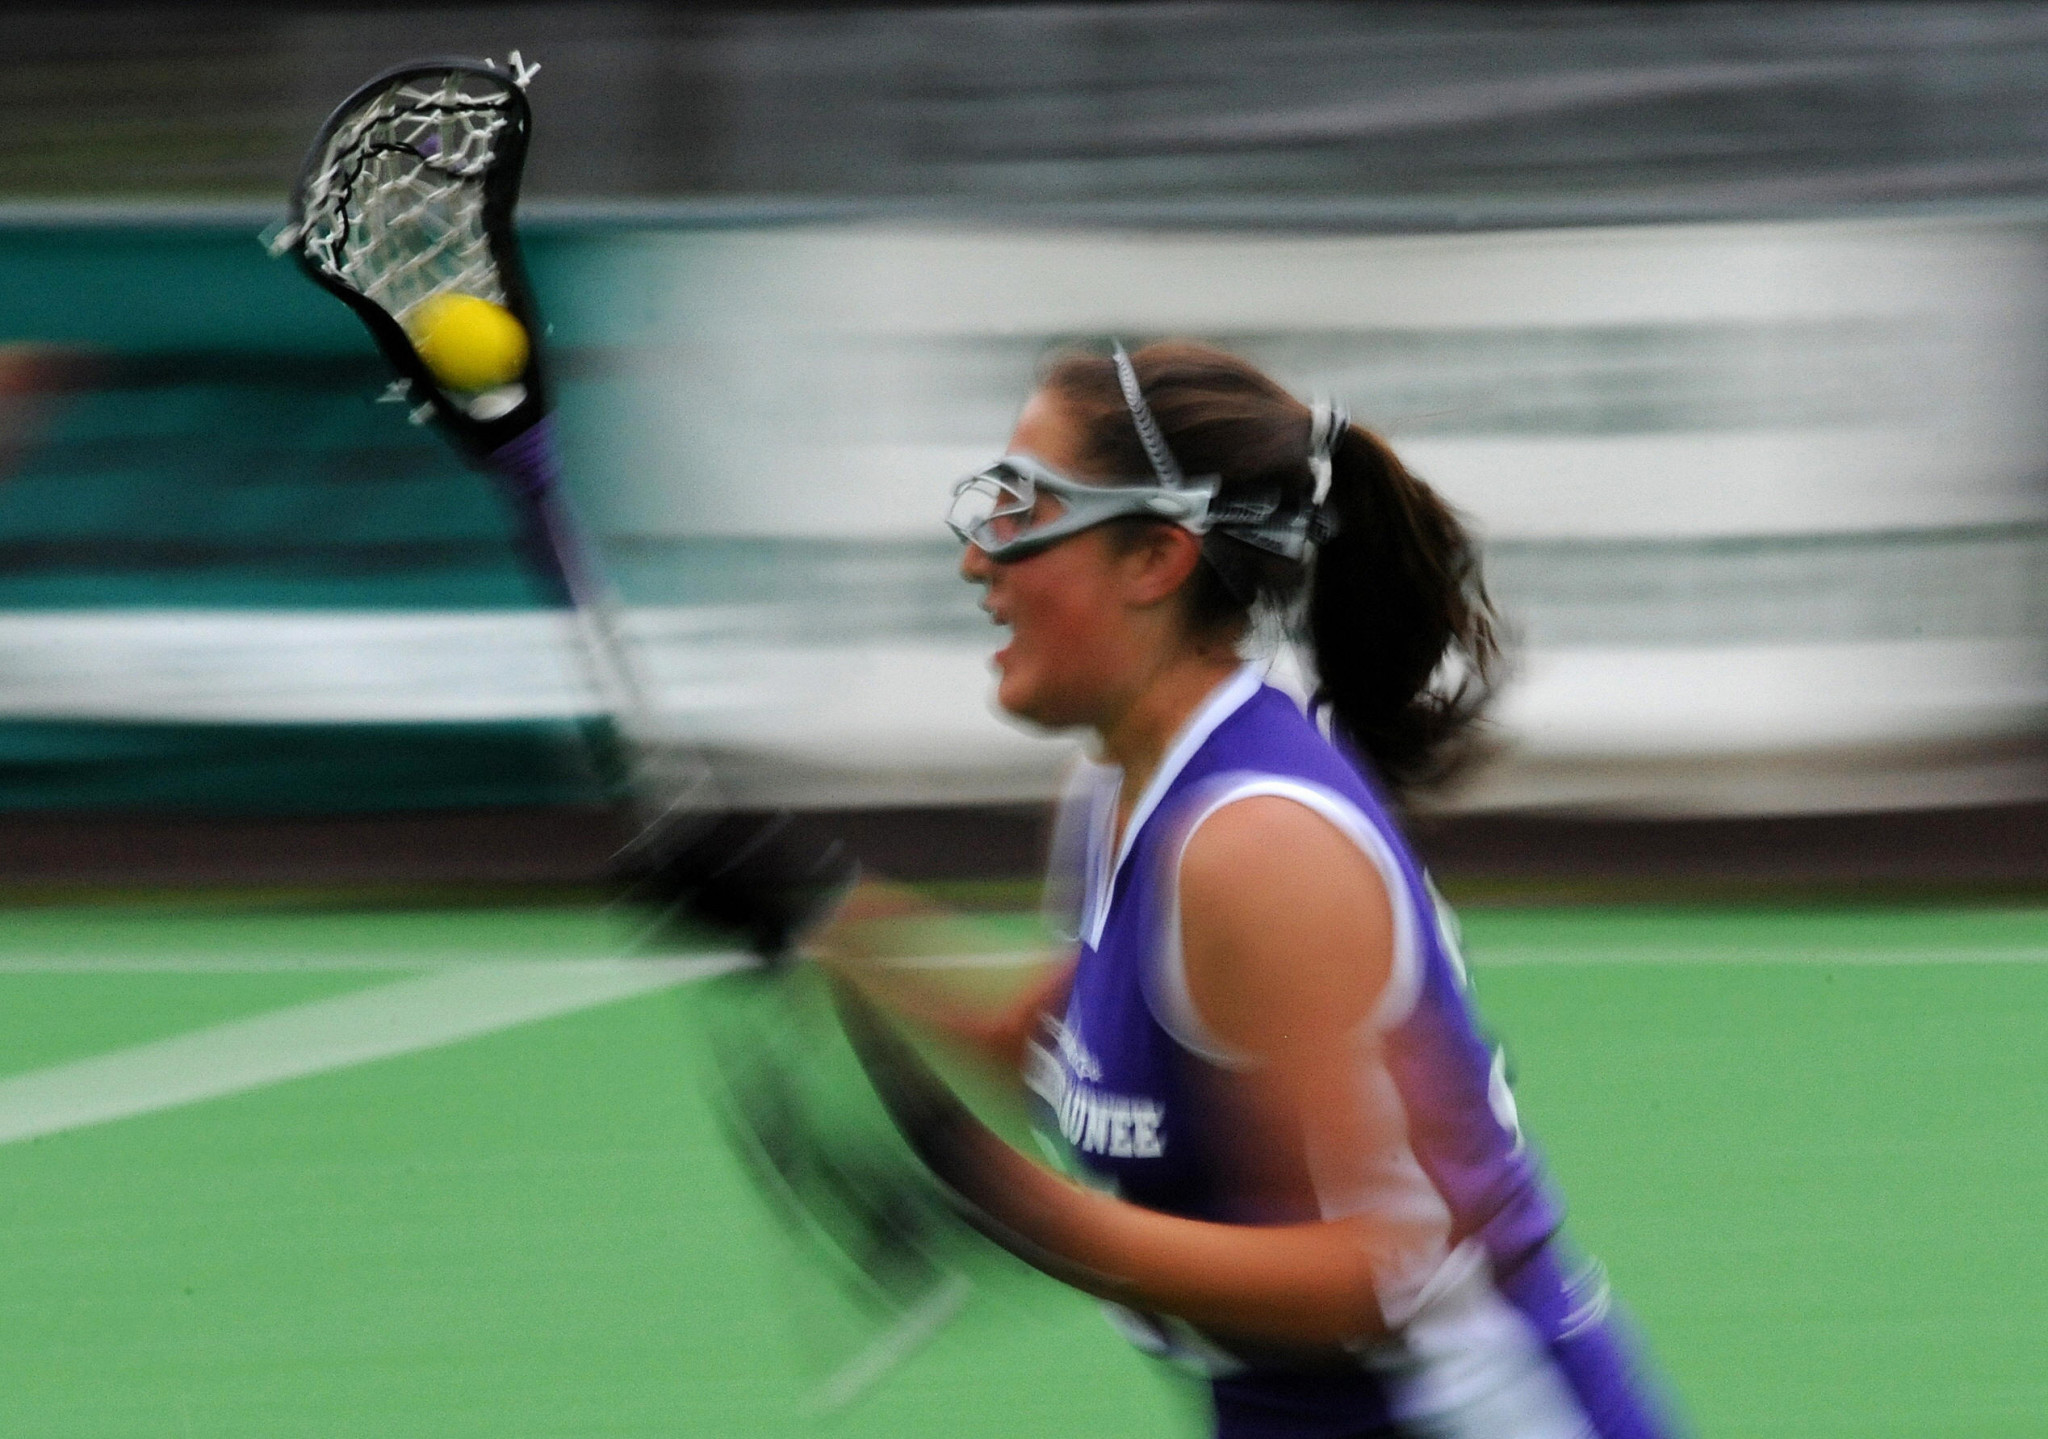 The Haudenosaunee represent themselves in international lacrosse ©Getty Images